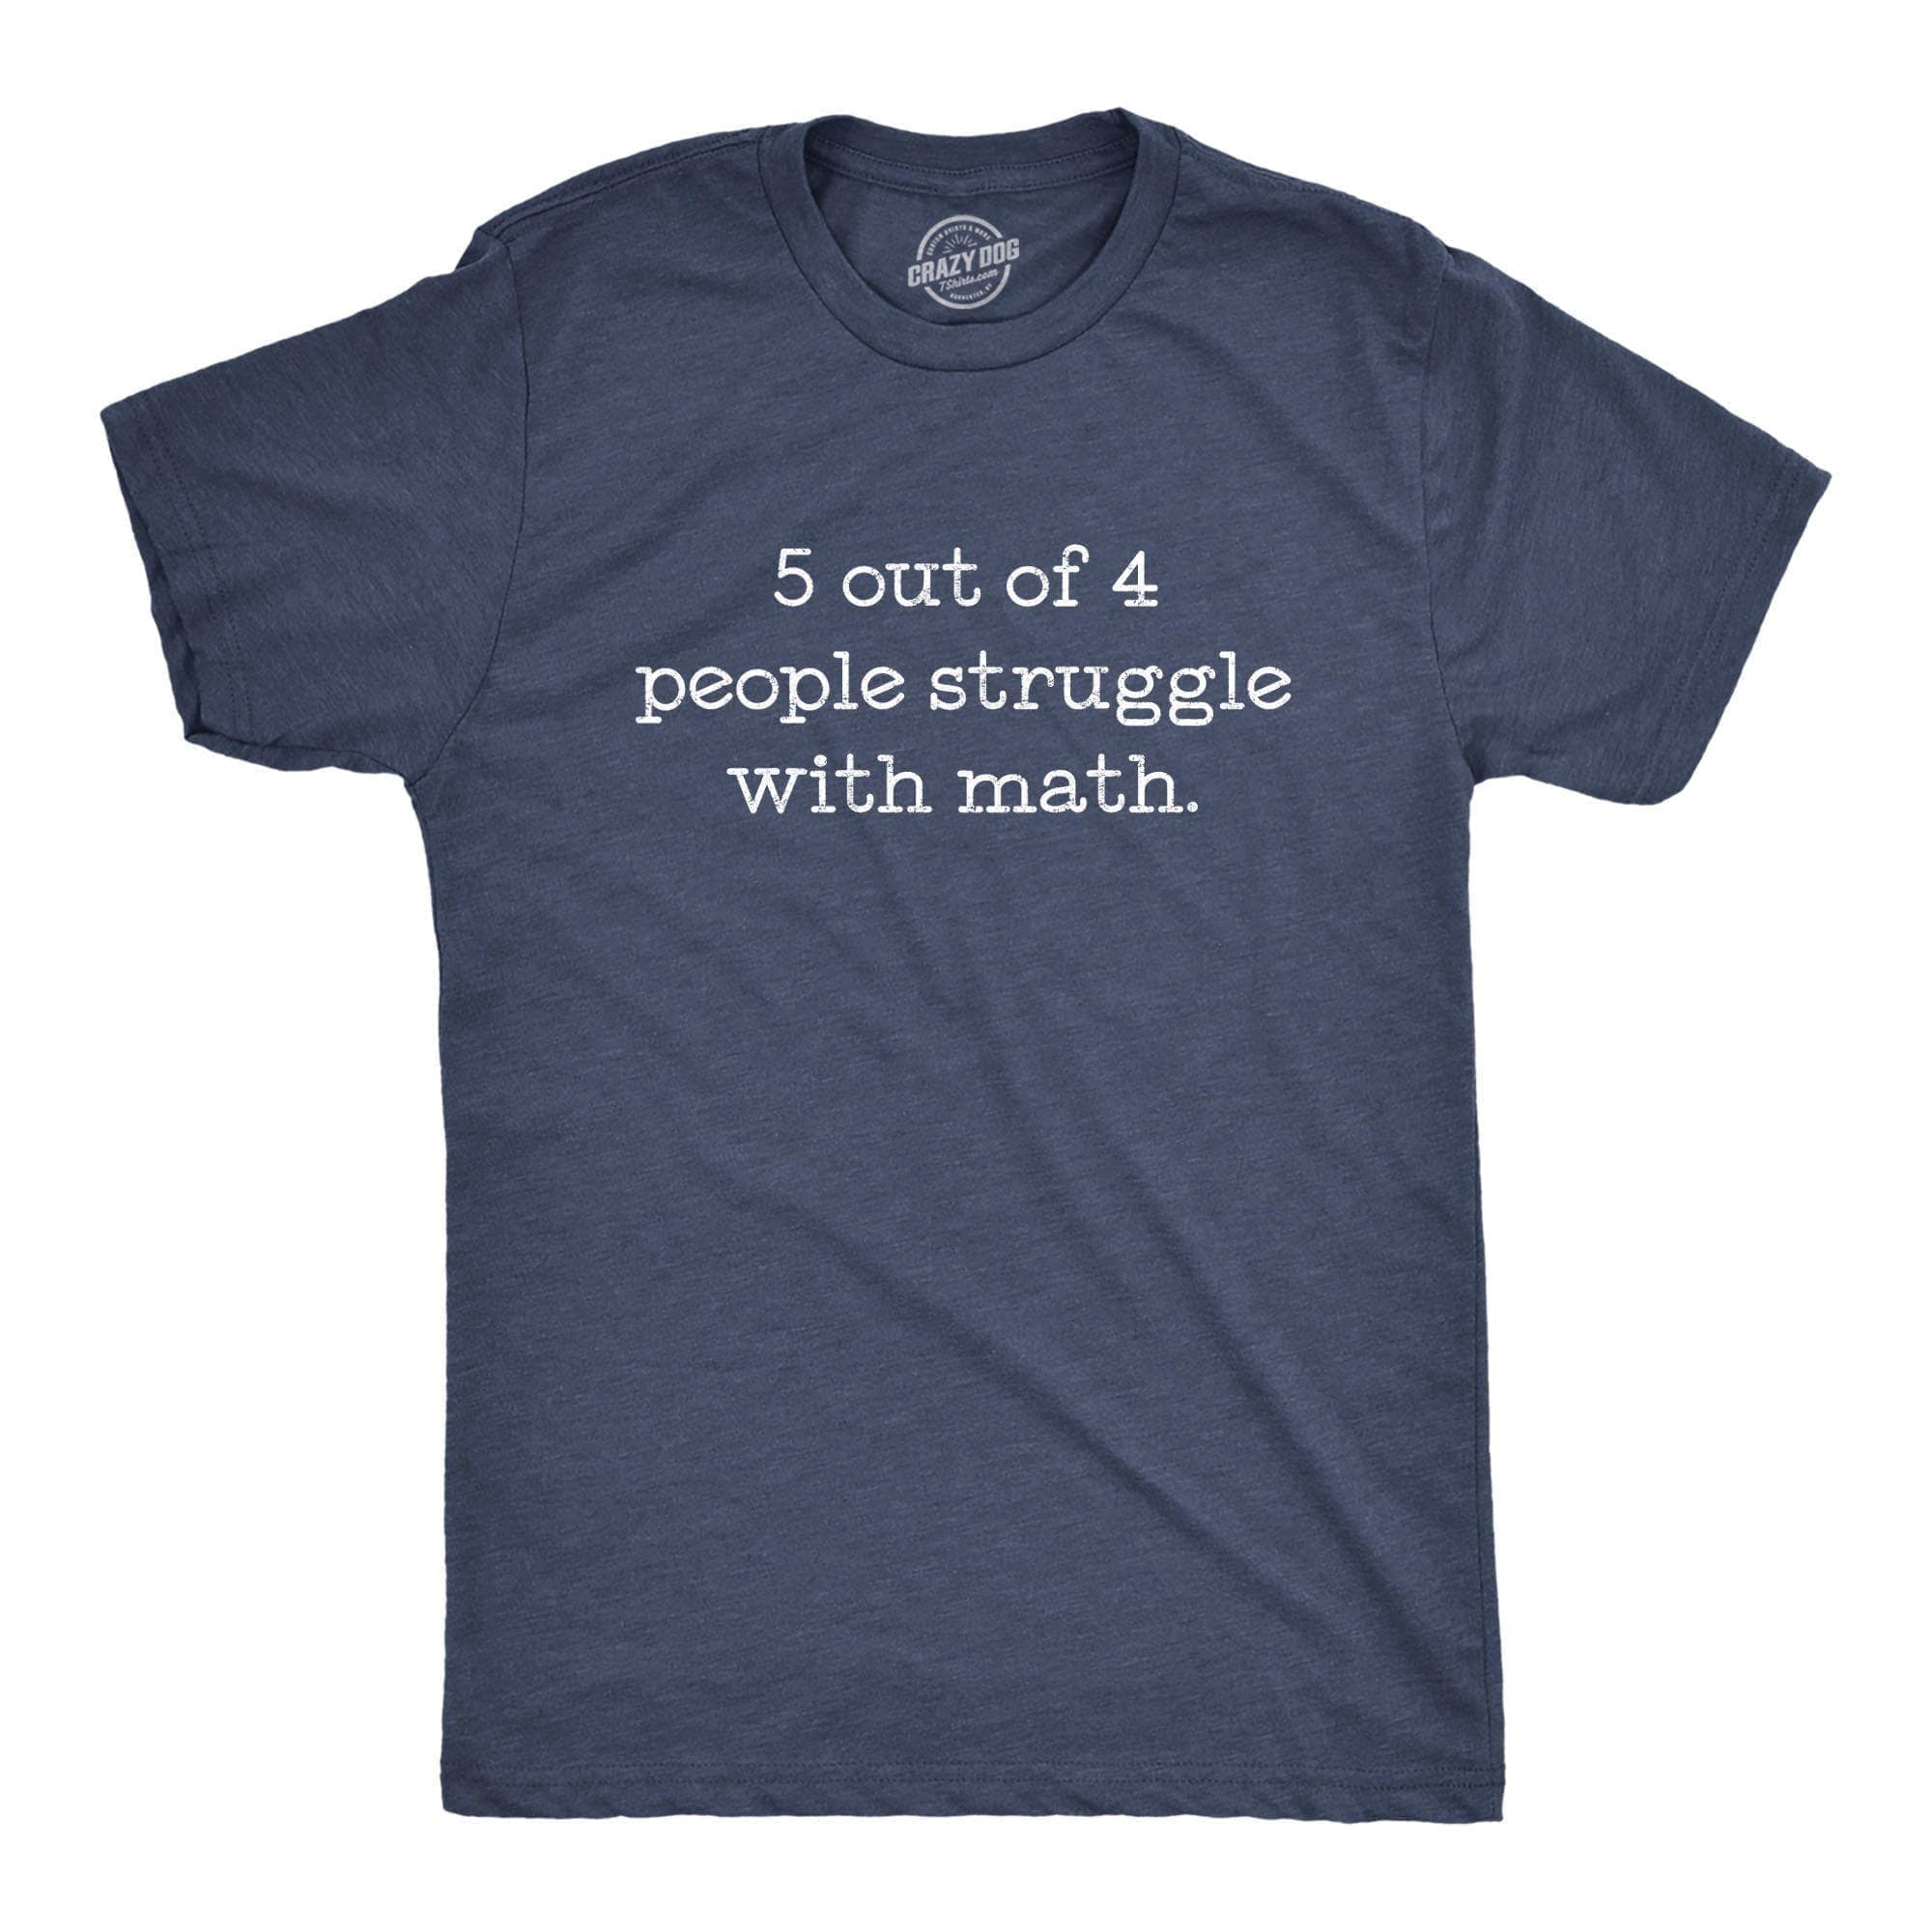 5 Out Of 4 People Struggle With Math Men's Tshirt - Crazy Dog T-Shirts